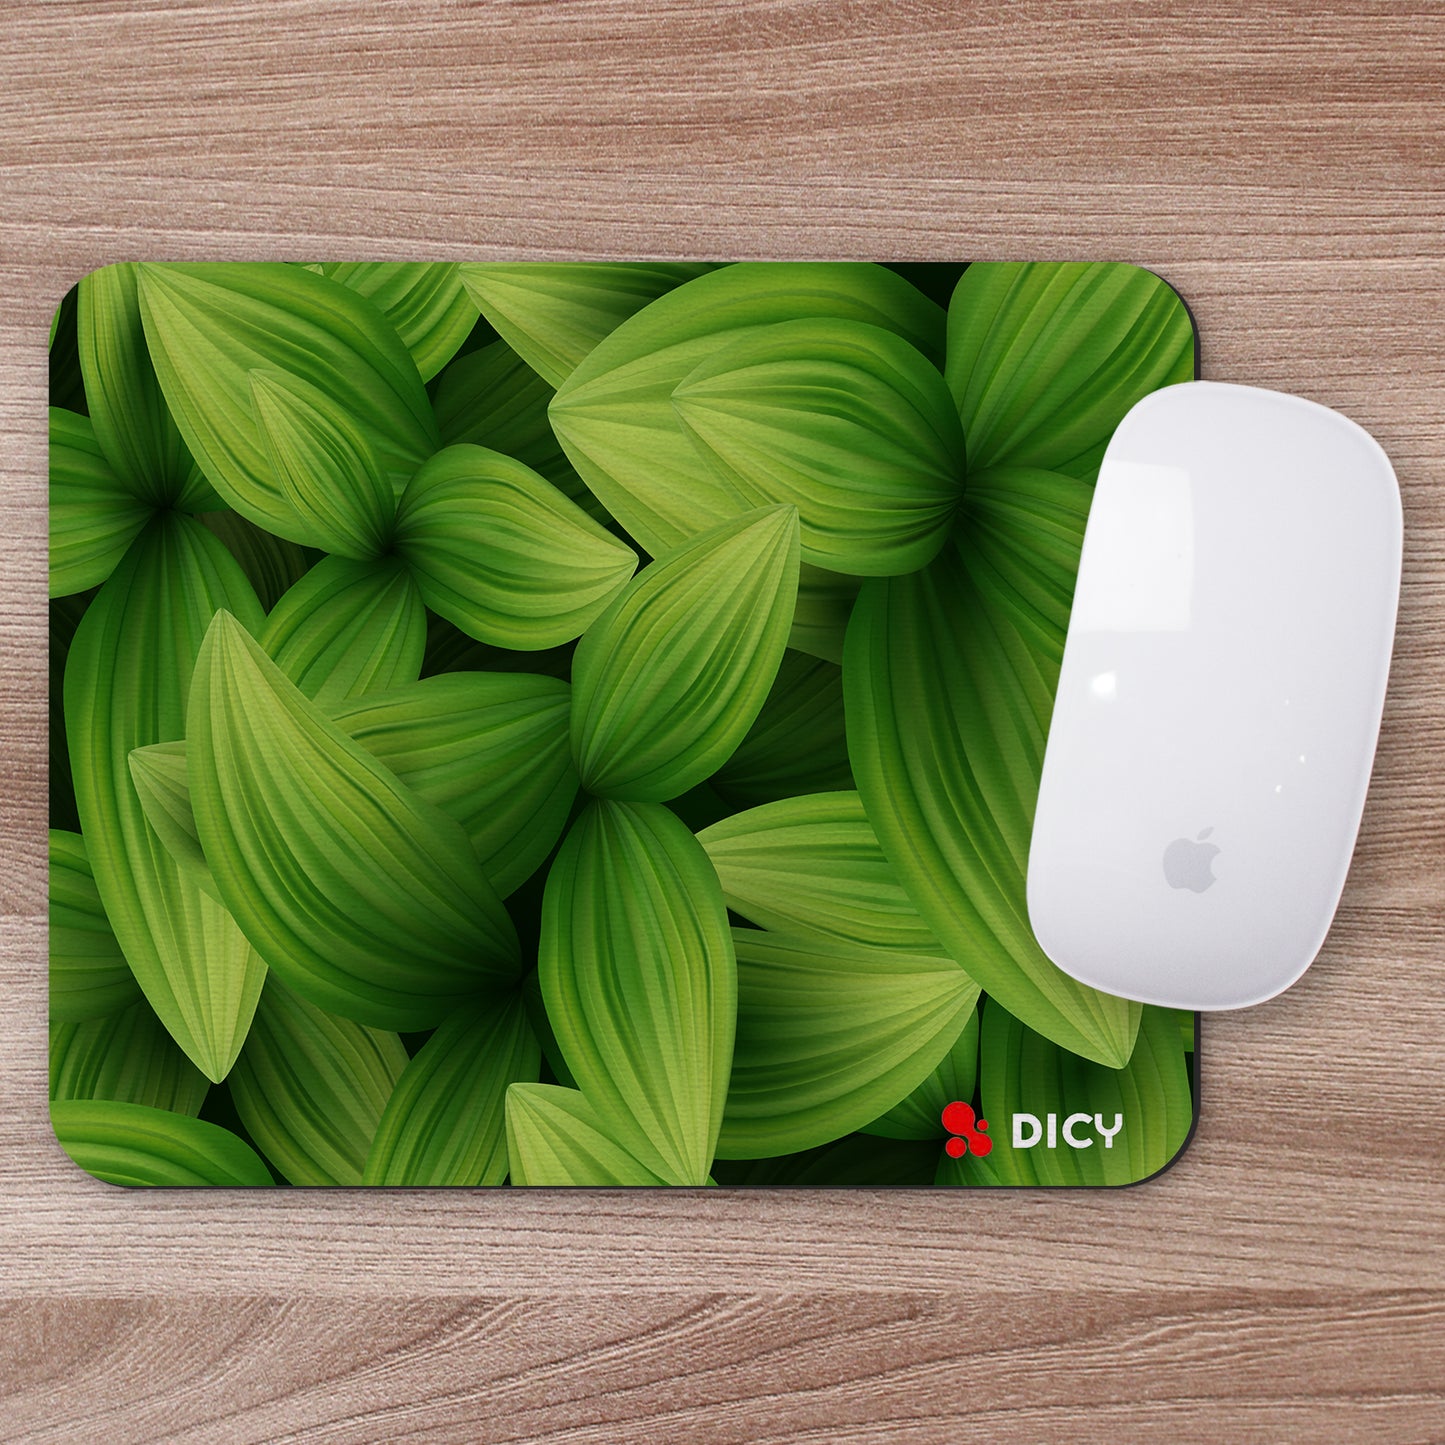 Mouse pad for Office Laptop/PC | Leaf